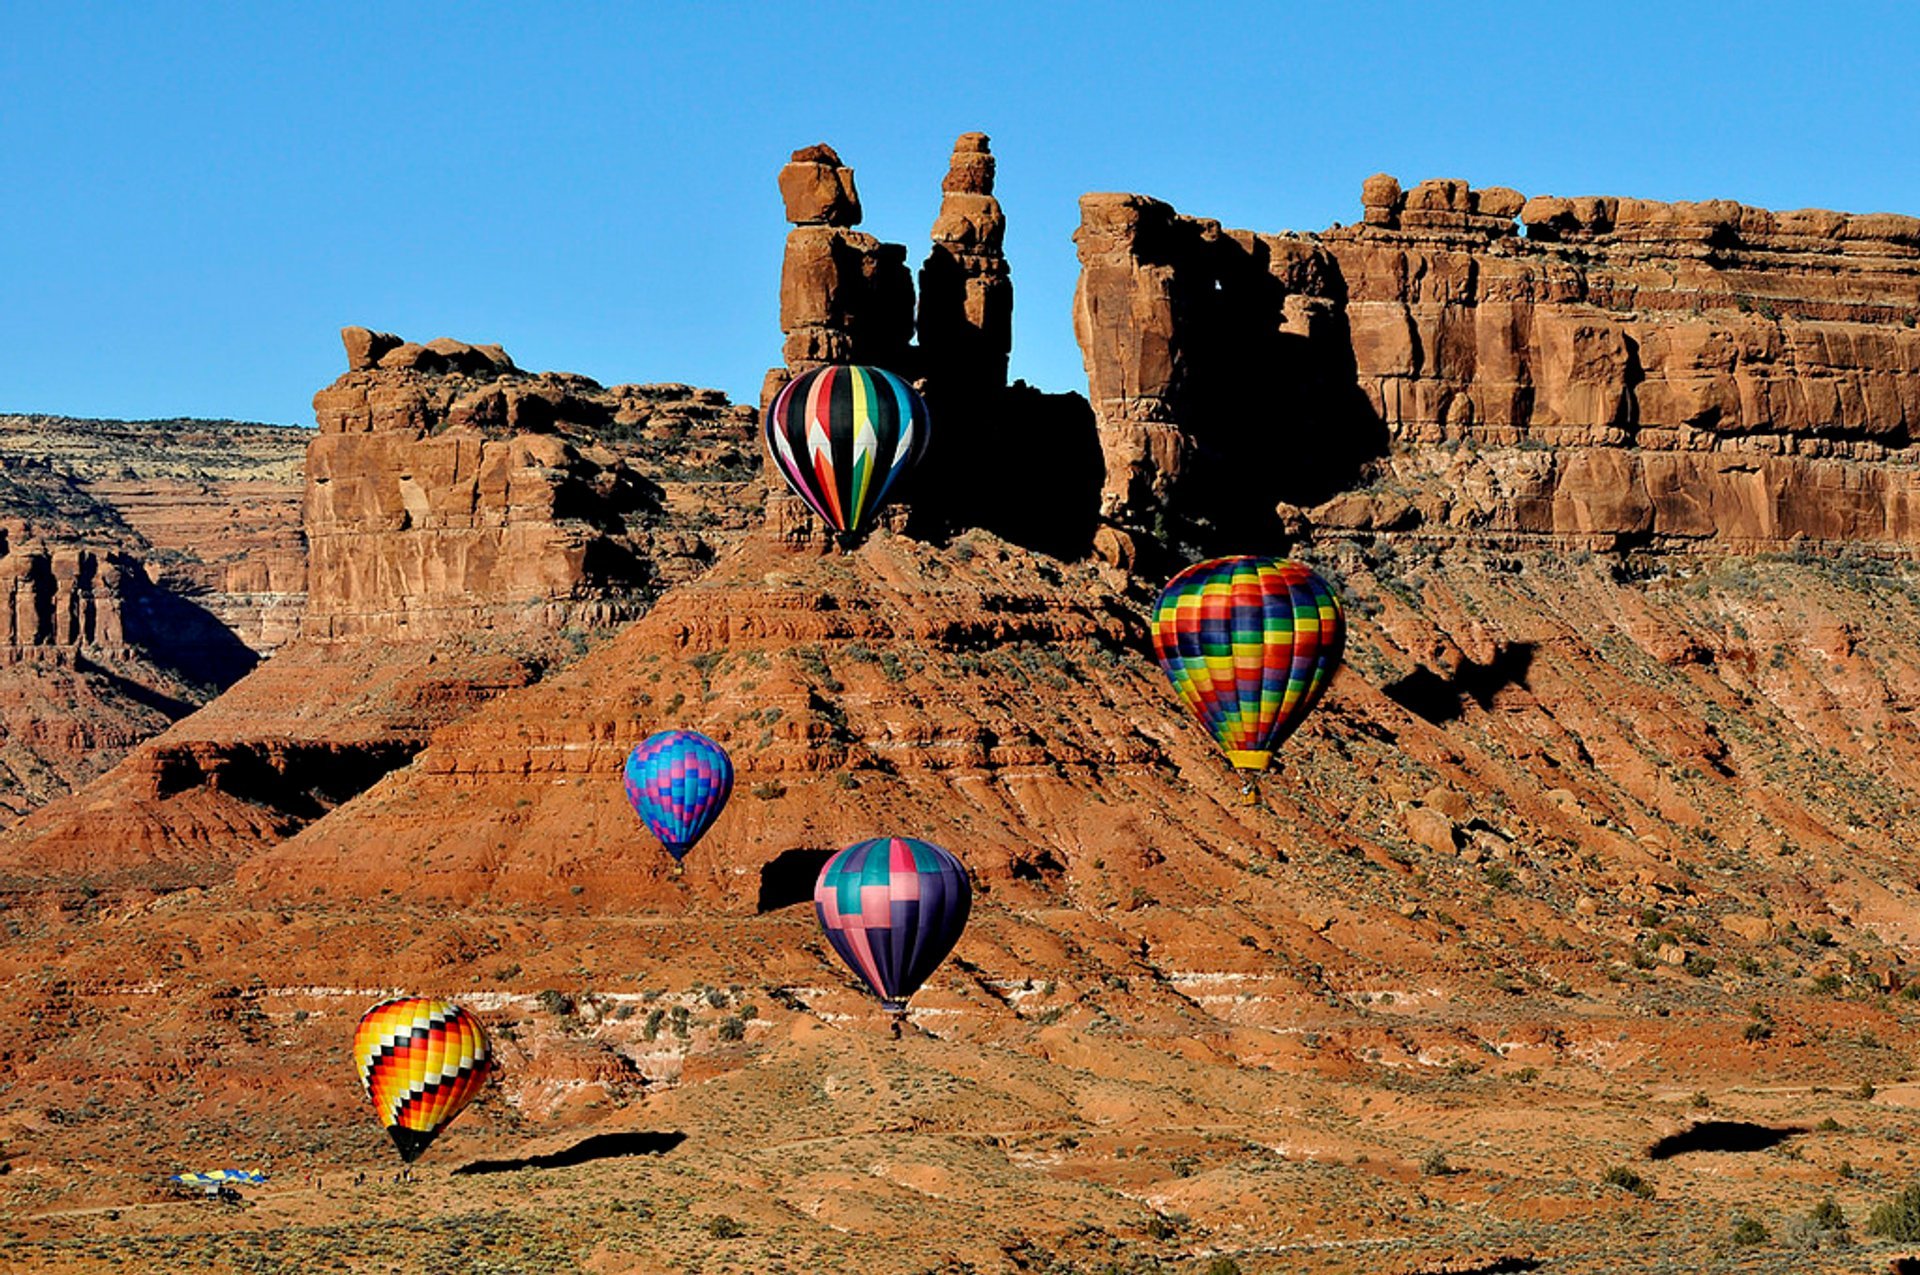 Ballooning over Monument Valley